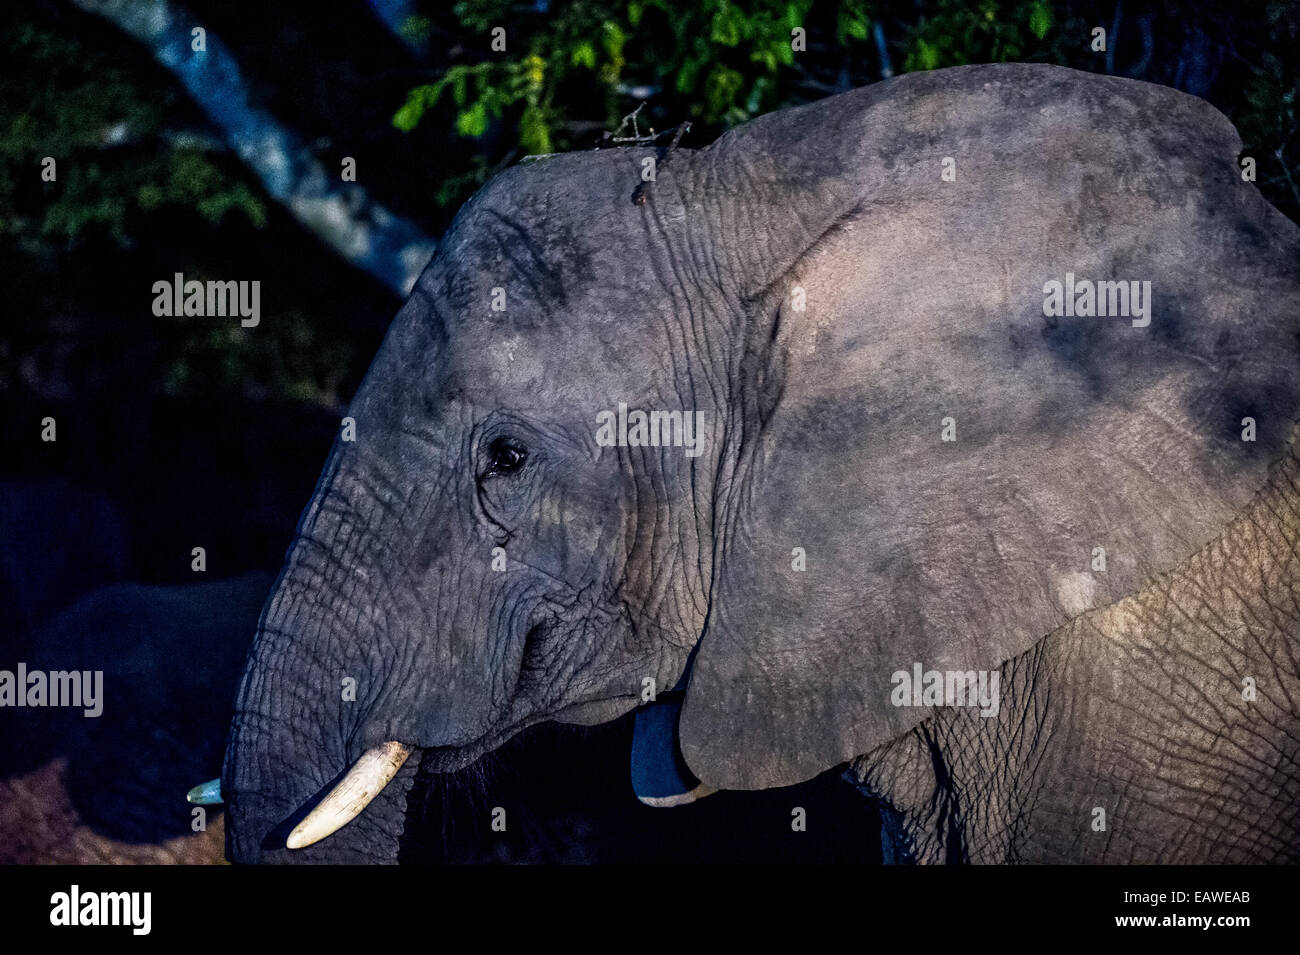 An African Elephant head emerges from the forest shadows at night. Stock Photo